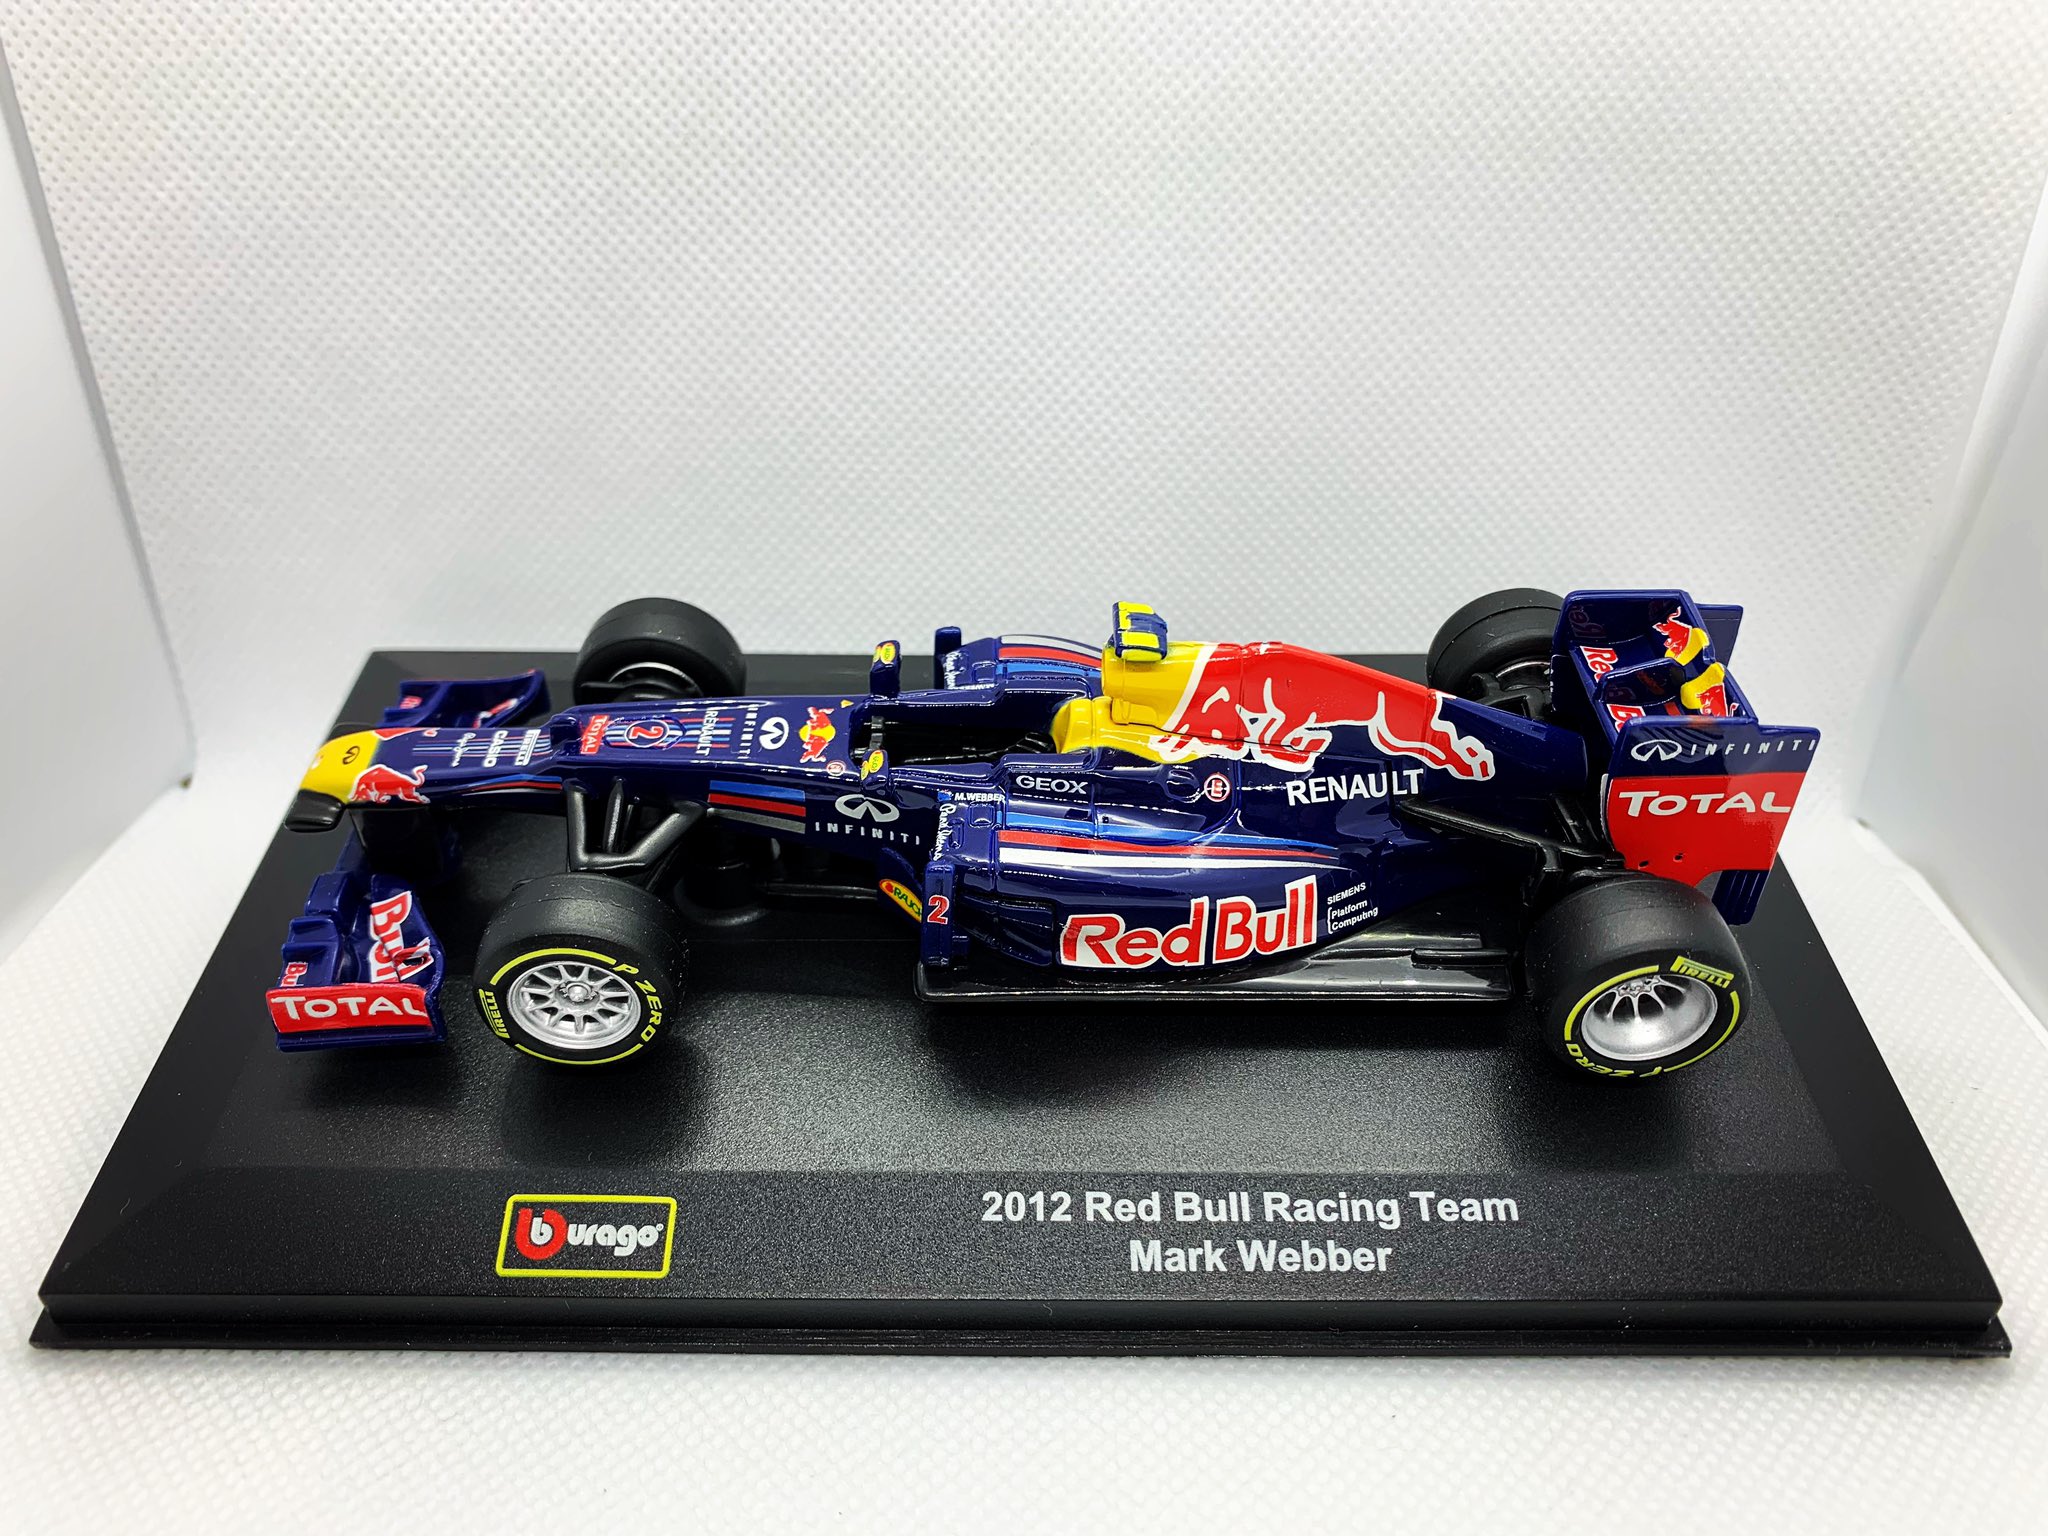 renæssance Thrust albue my_home_scale_cars_collection on Twitter: "2012 Red Bull Racing Team Mark  Webber 1:32 BBURAGO #f1 #formula1 #car #toy #f12012 #2012 #red #bull #racing  #team #redbull #redbullracing #redbullracingteam #redbullracingf1 #mark  #webber #markwebber #2 ...